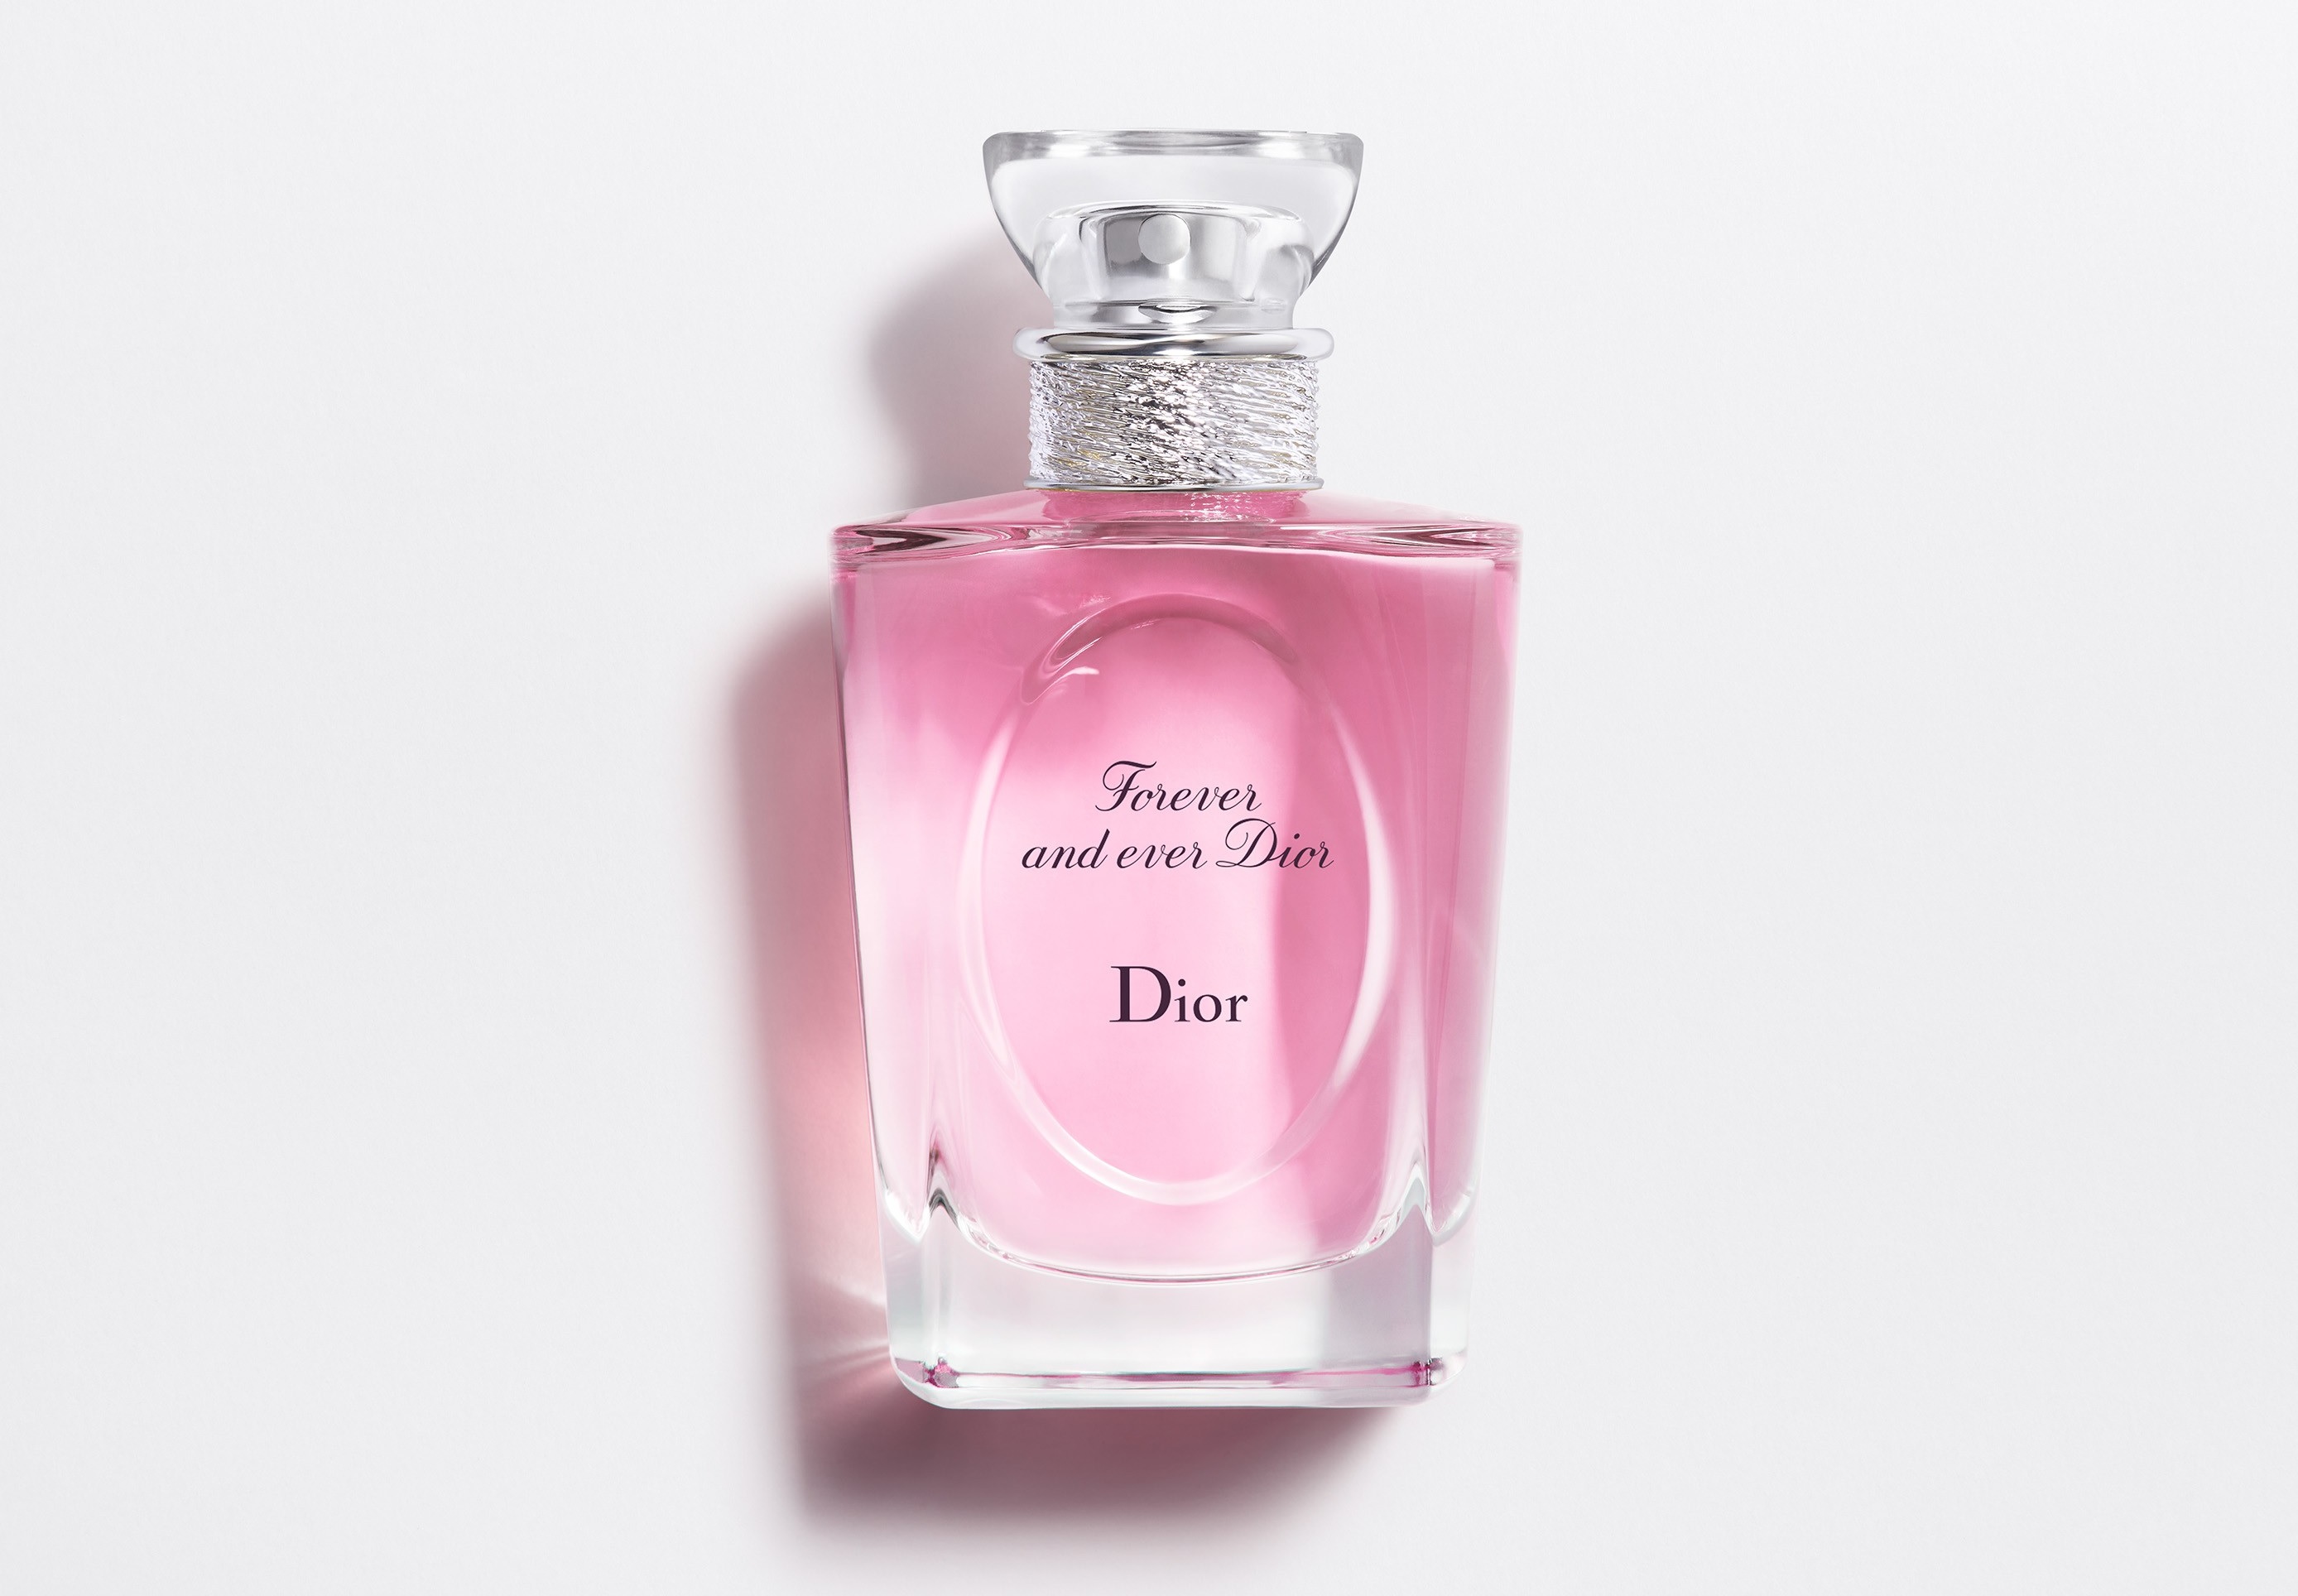 Dior Forever and Ever Dior